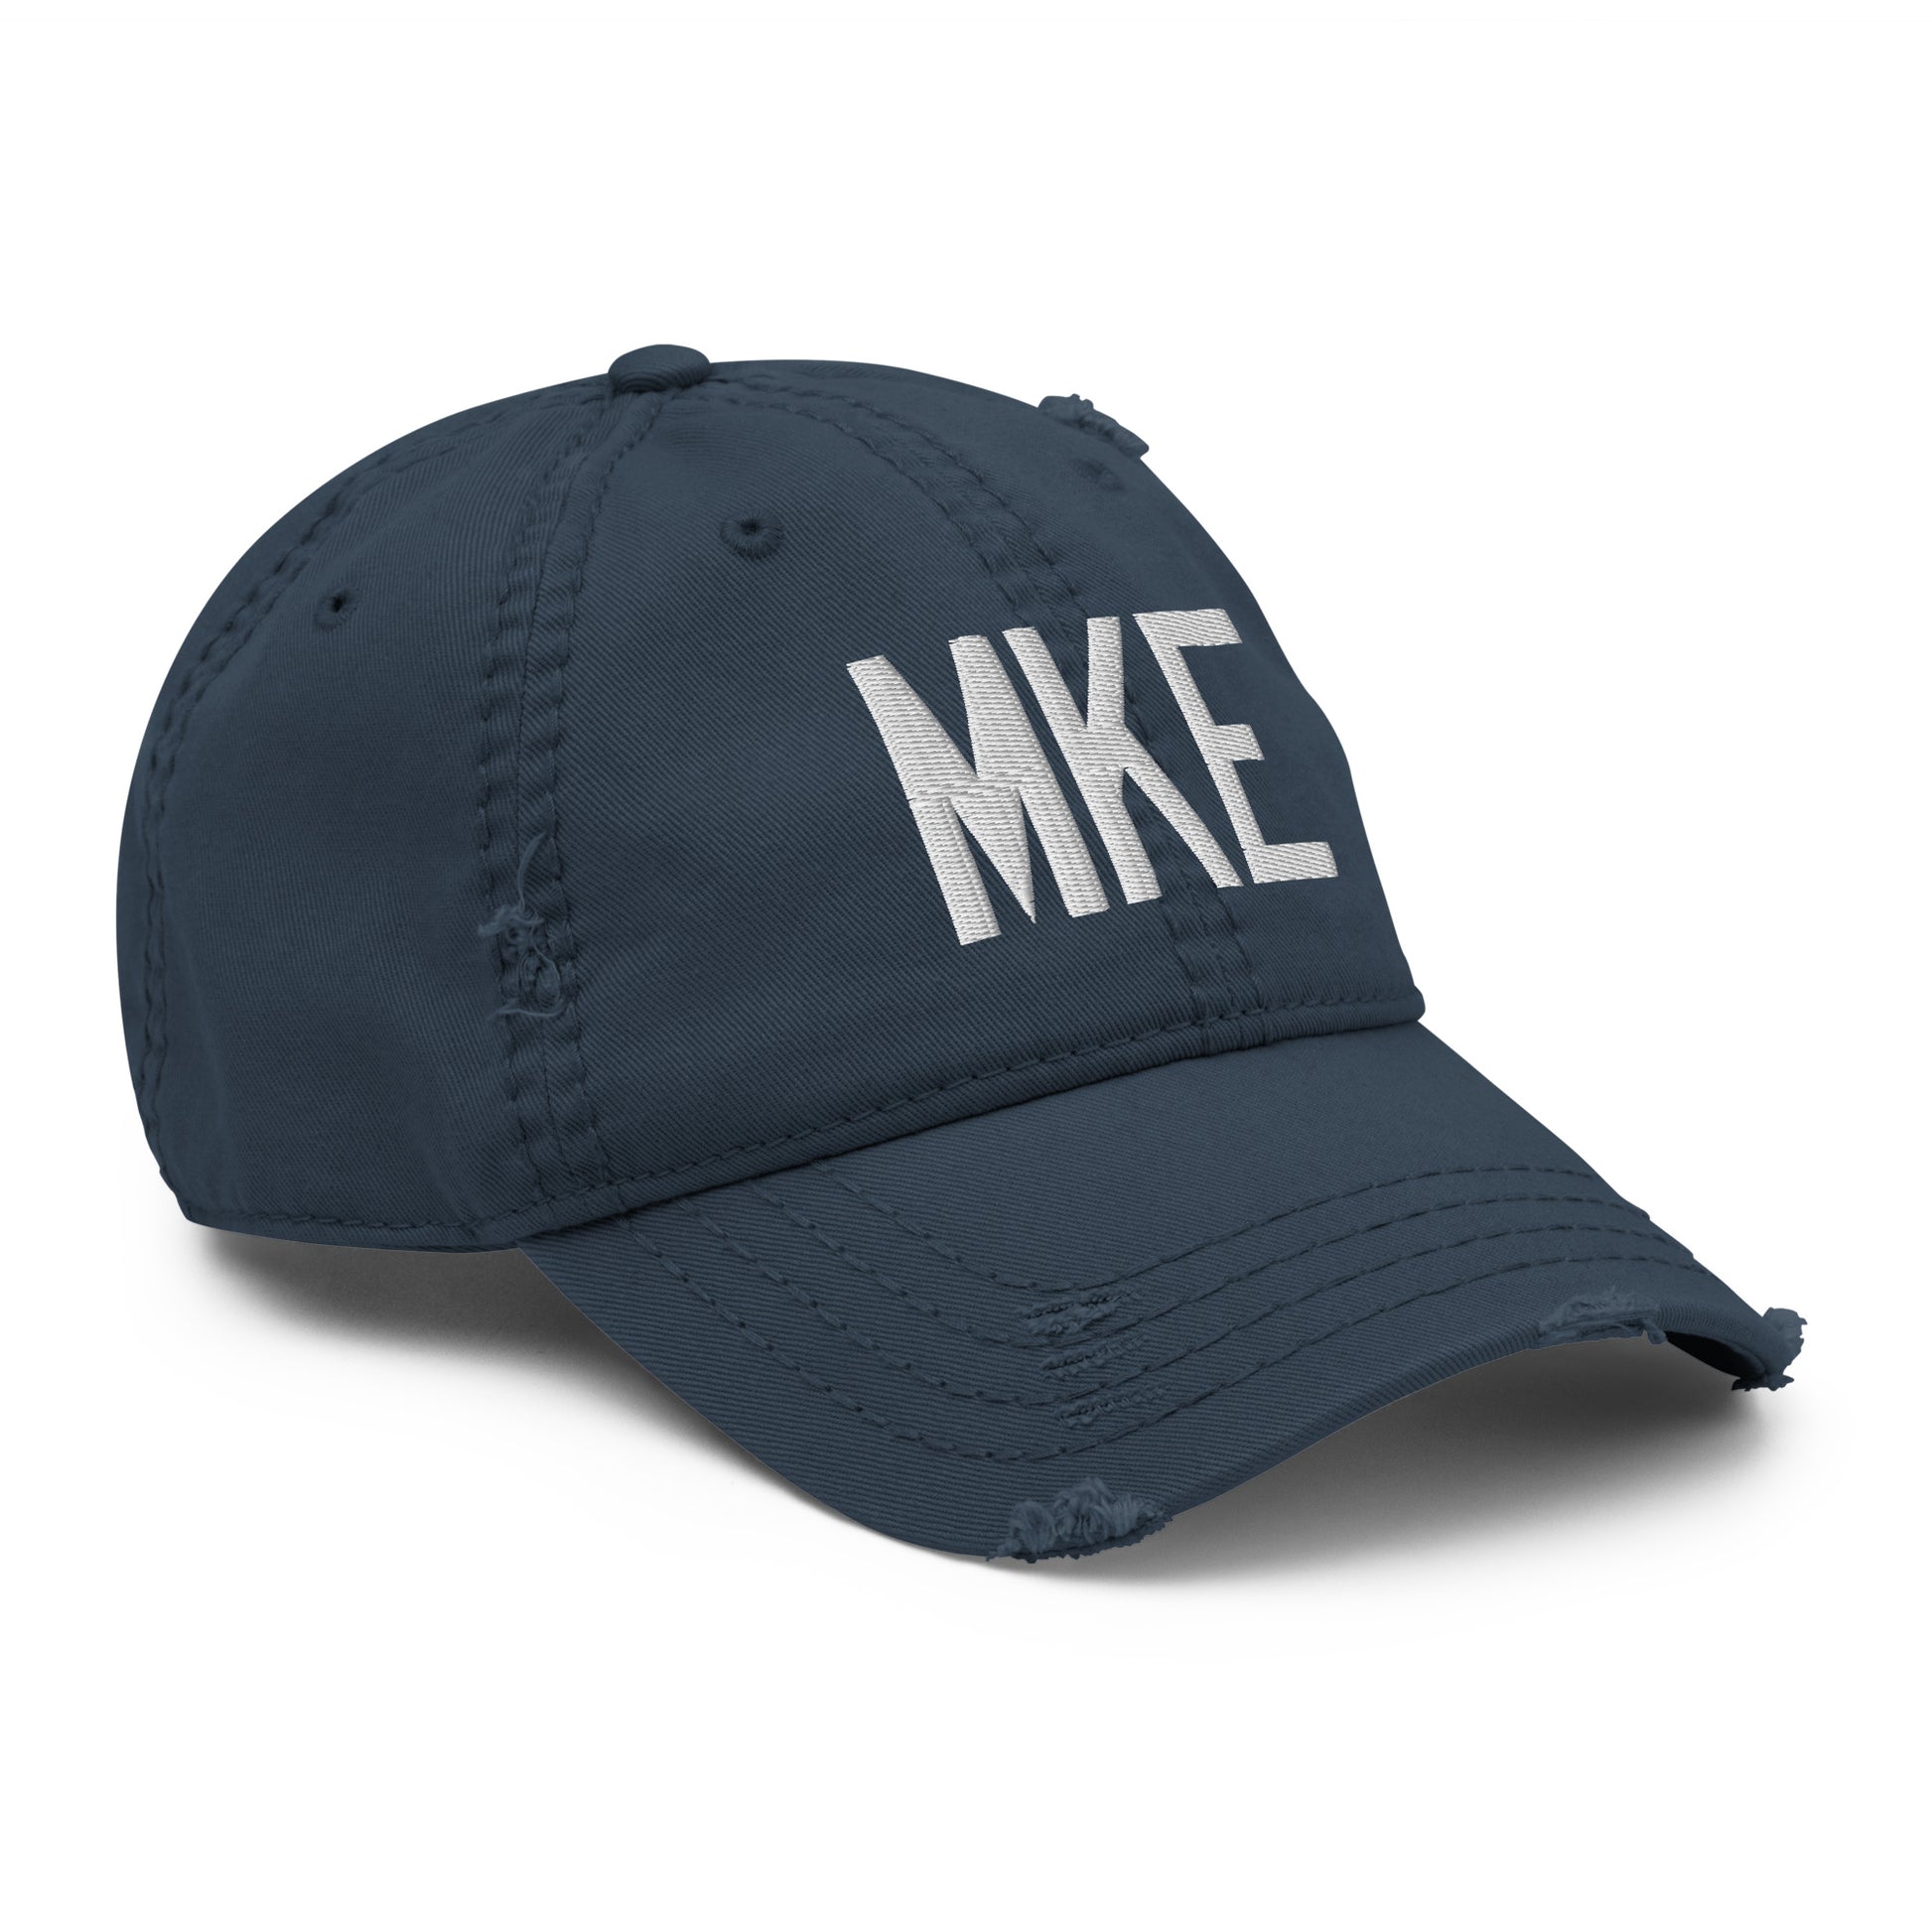 Airport Code Distressed Hat - White • MKE Milwaukee • YHM Designs - Image 14